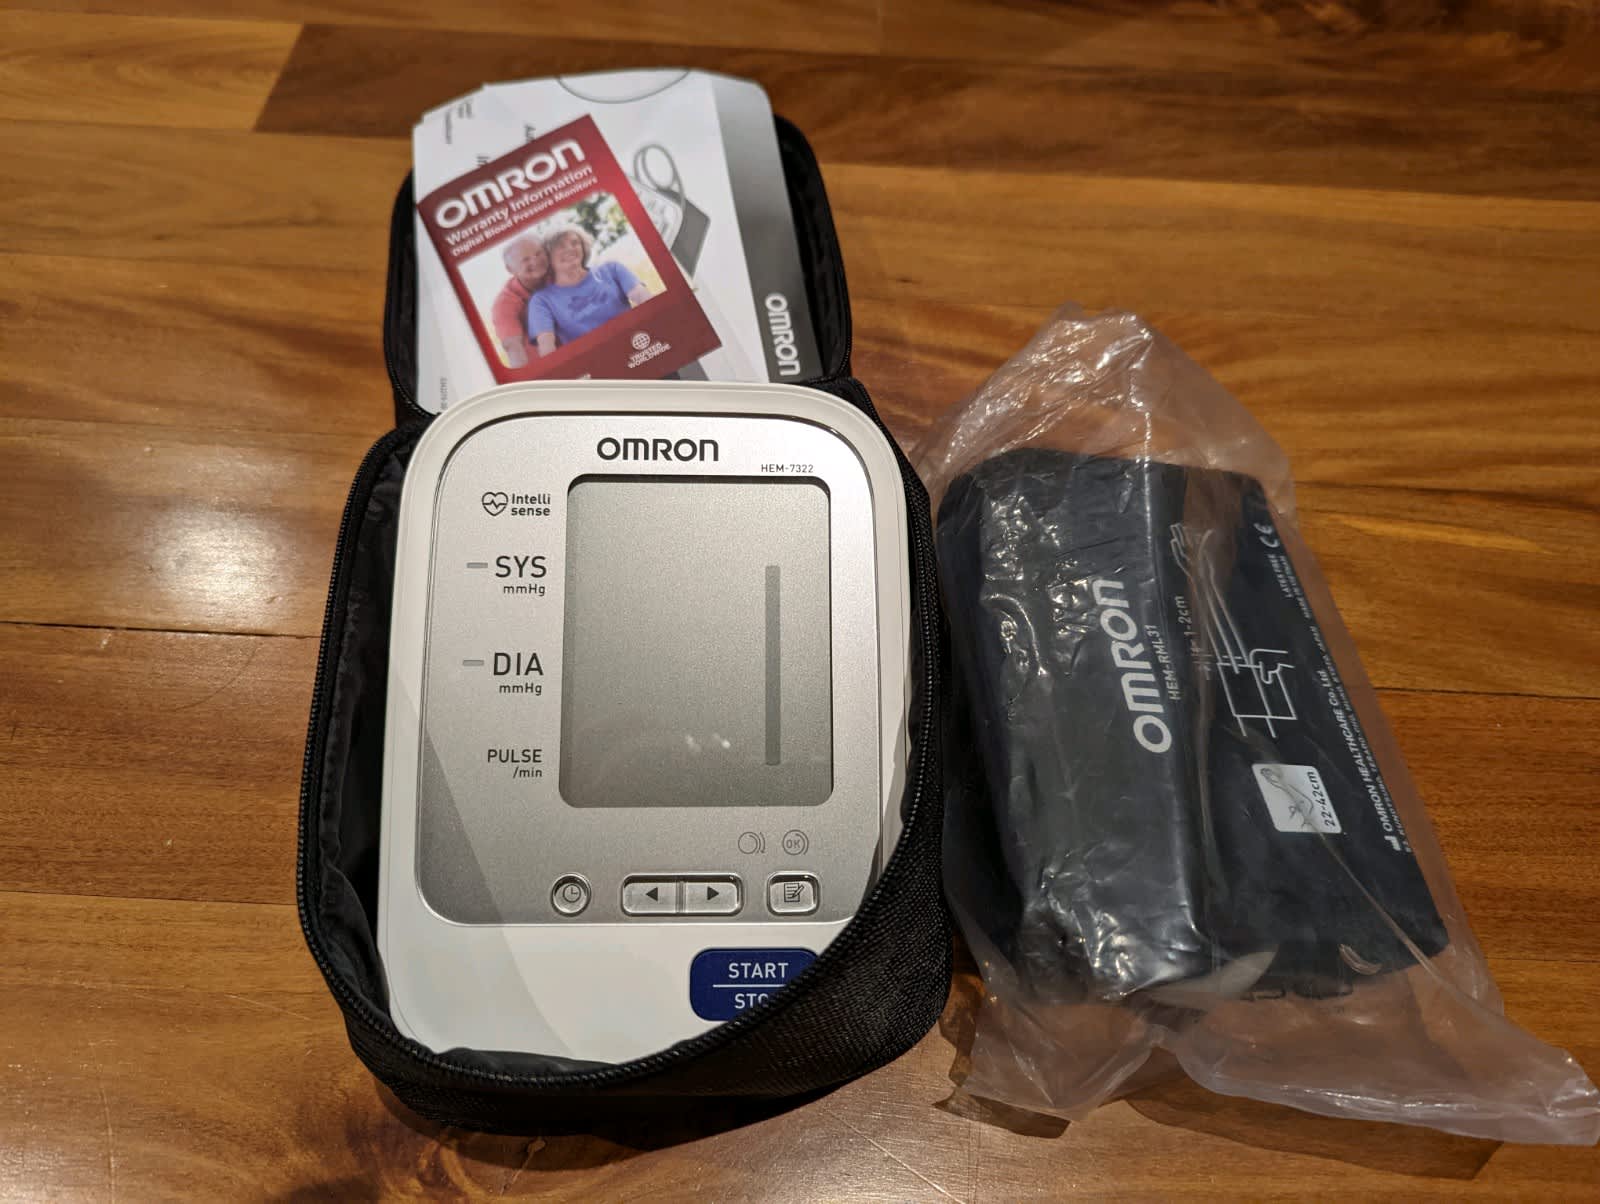 Omron Automatic Blood Pressure Monitor With Large Cuff HEM-712CLC 1 Each 